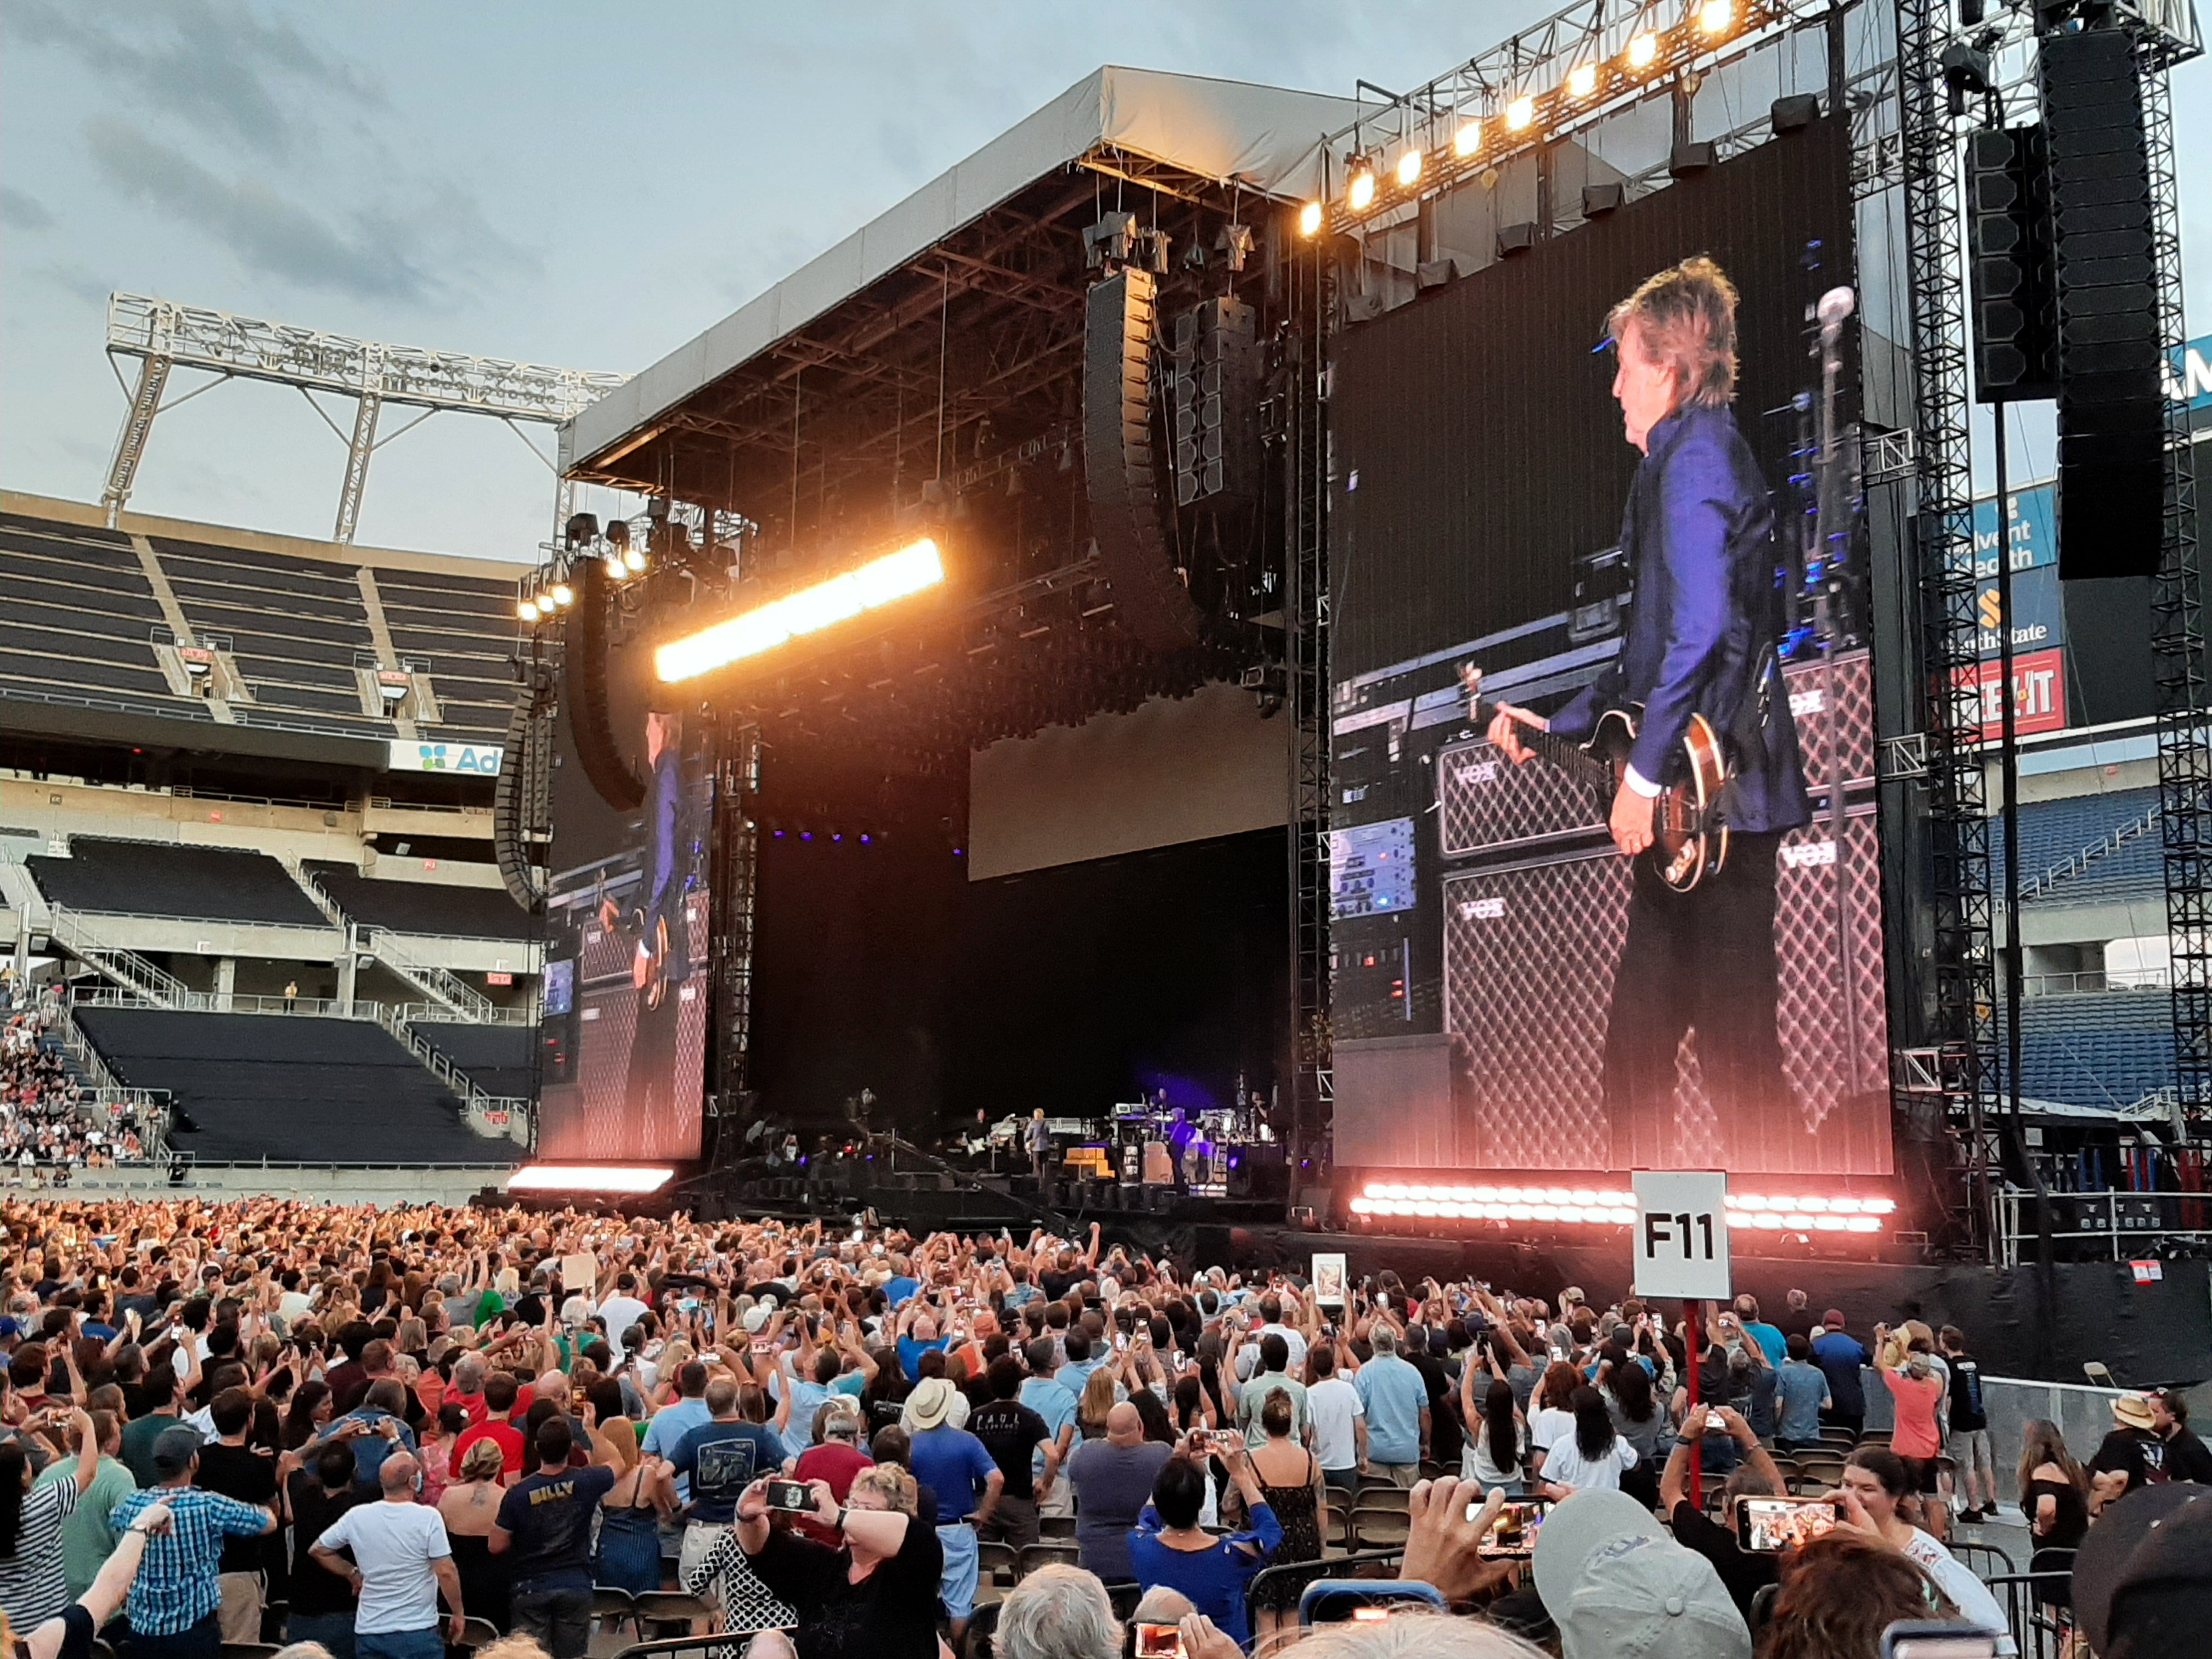 section 133, row c seat view  for concert - camping world stadium